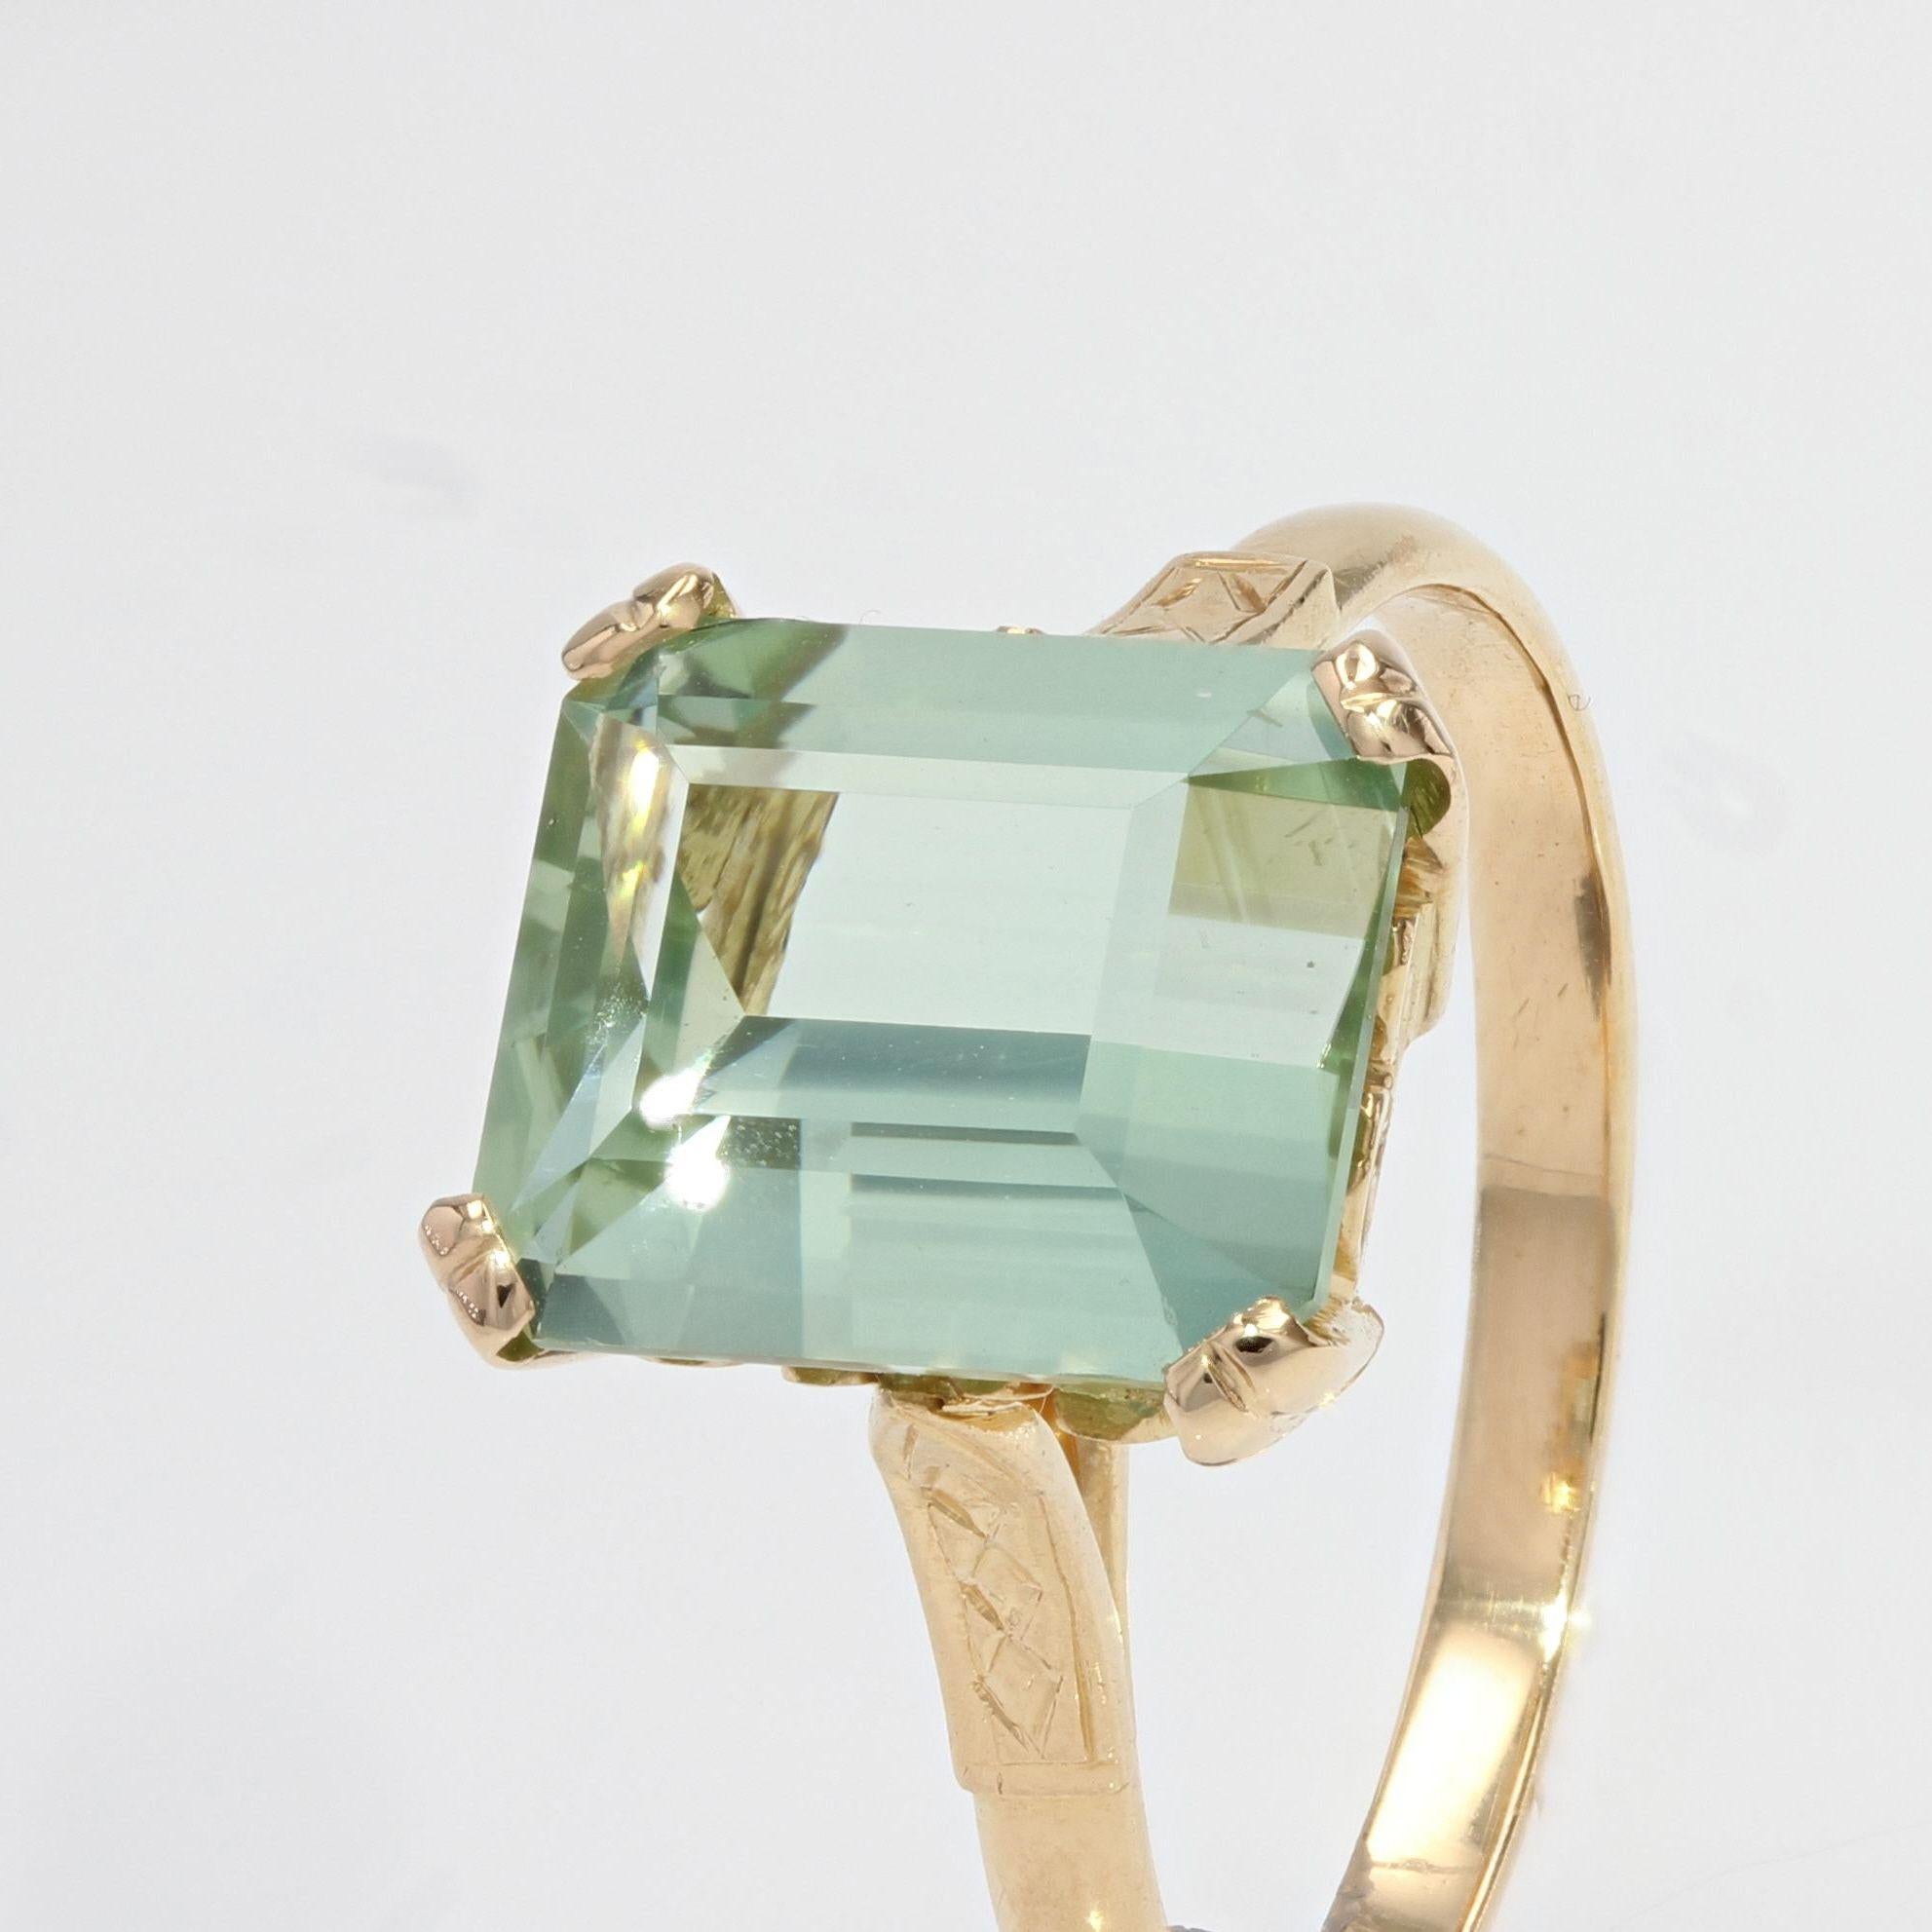 French 1960s 5.82 Carat Watermint Tourmaline 18 Karat Yellow Gold Ring For Sale 2